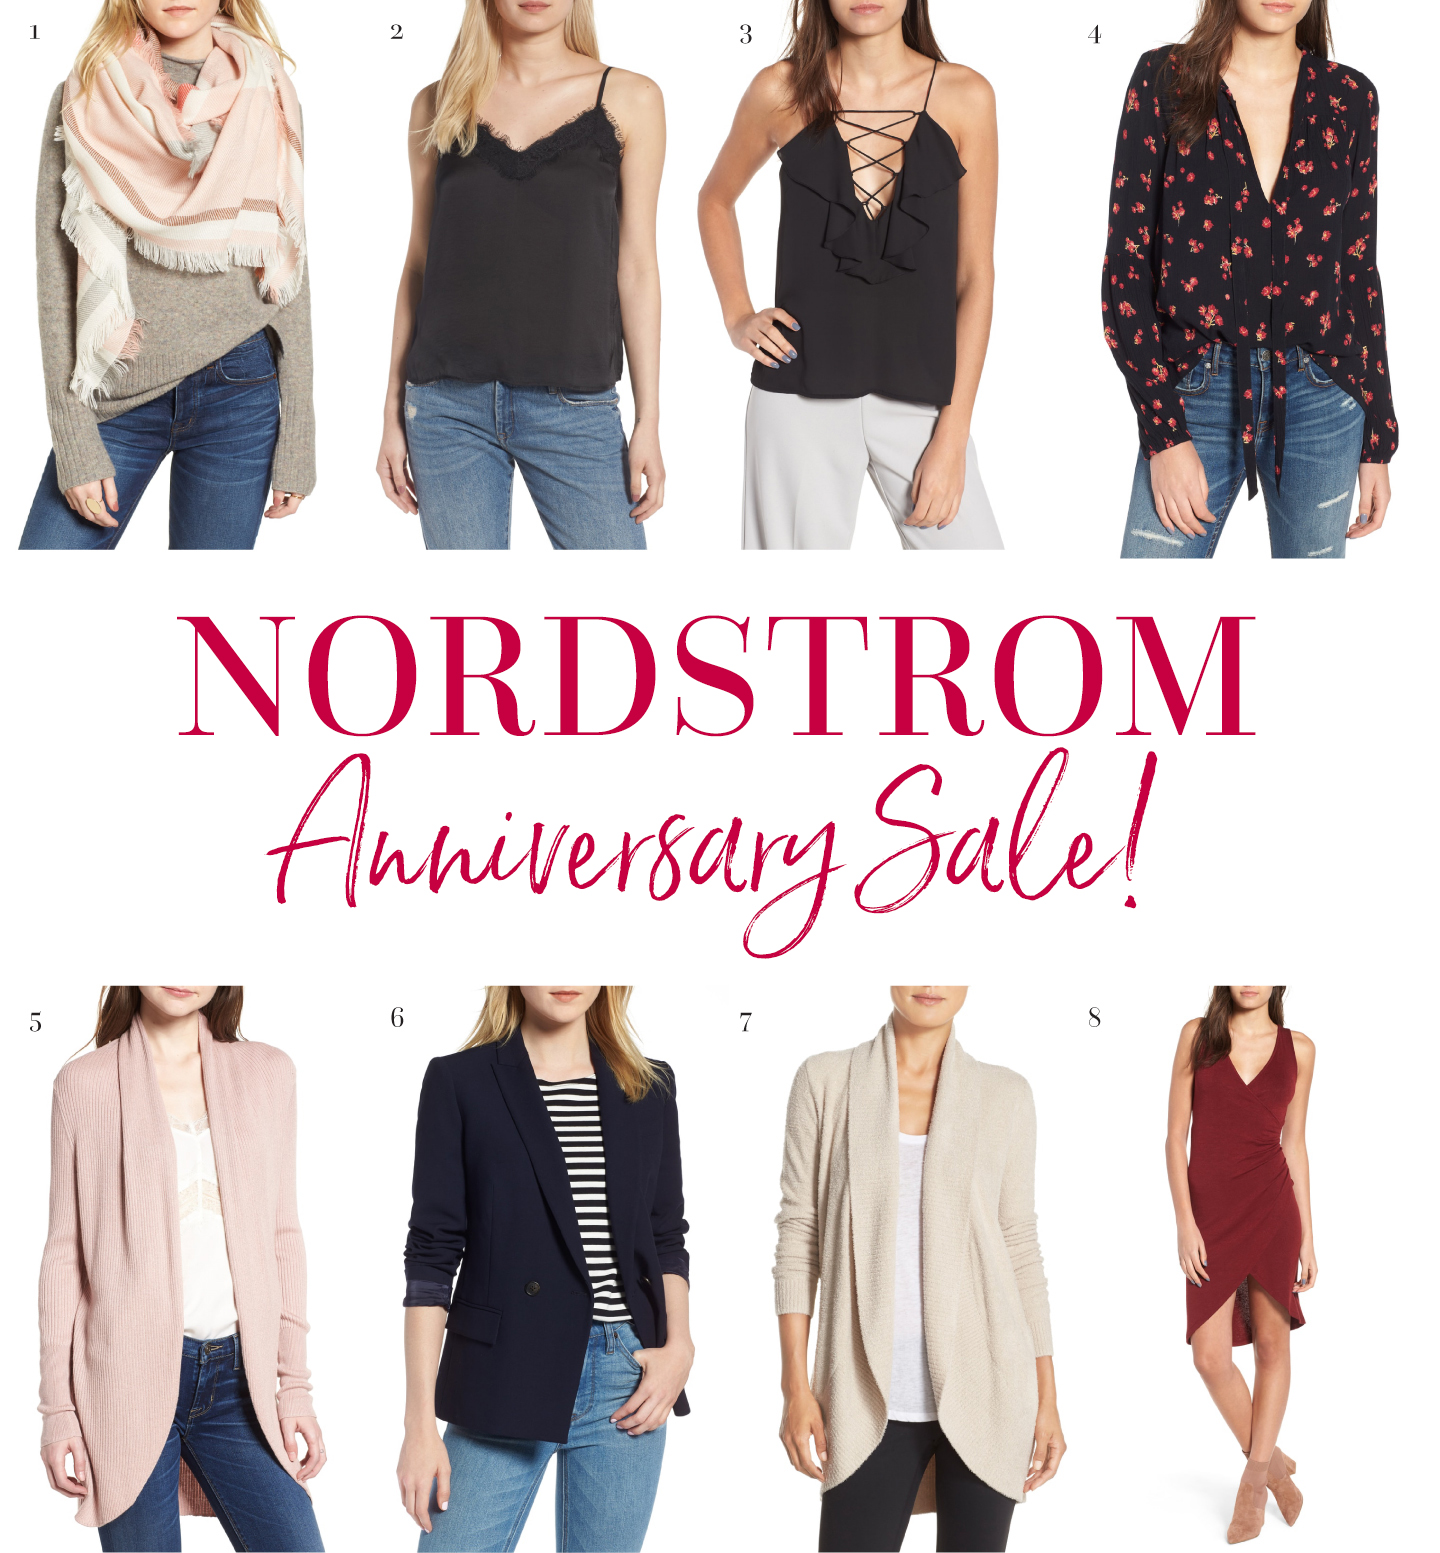 Nordstrom Anniversary Sale - What I Bought! - Chase Amie